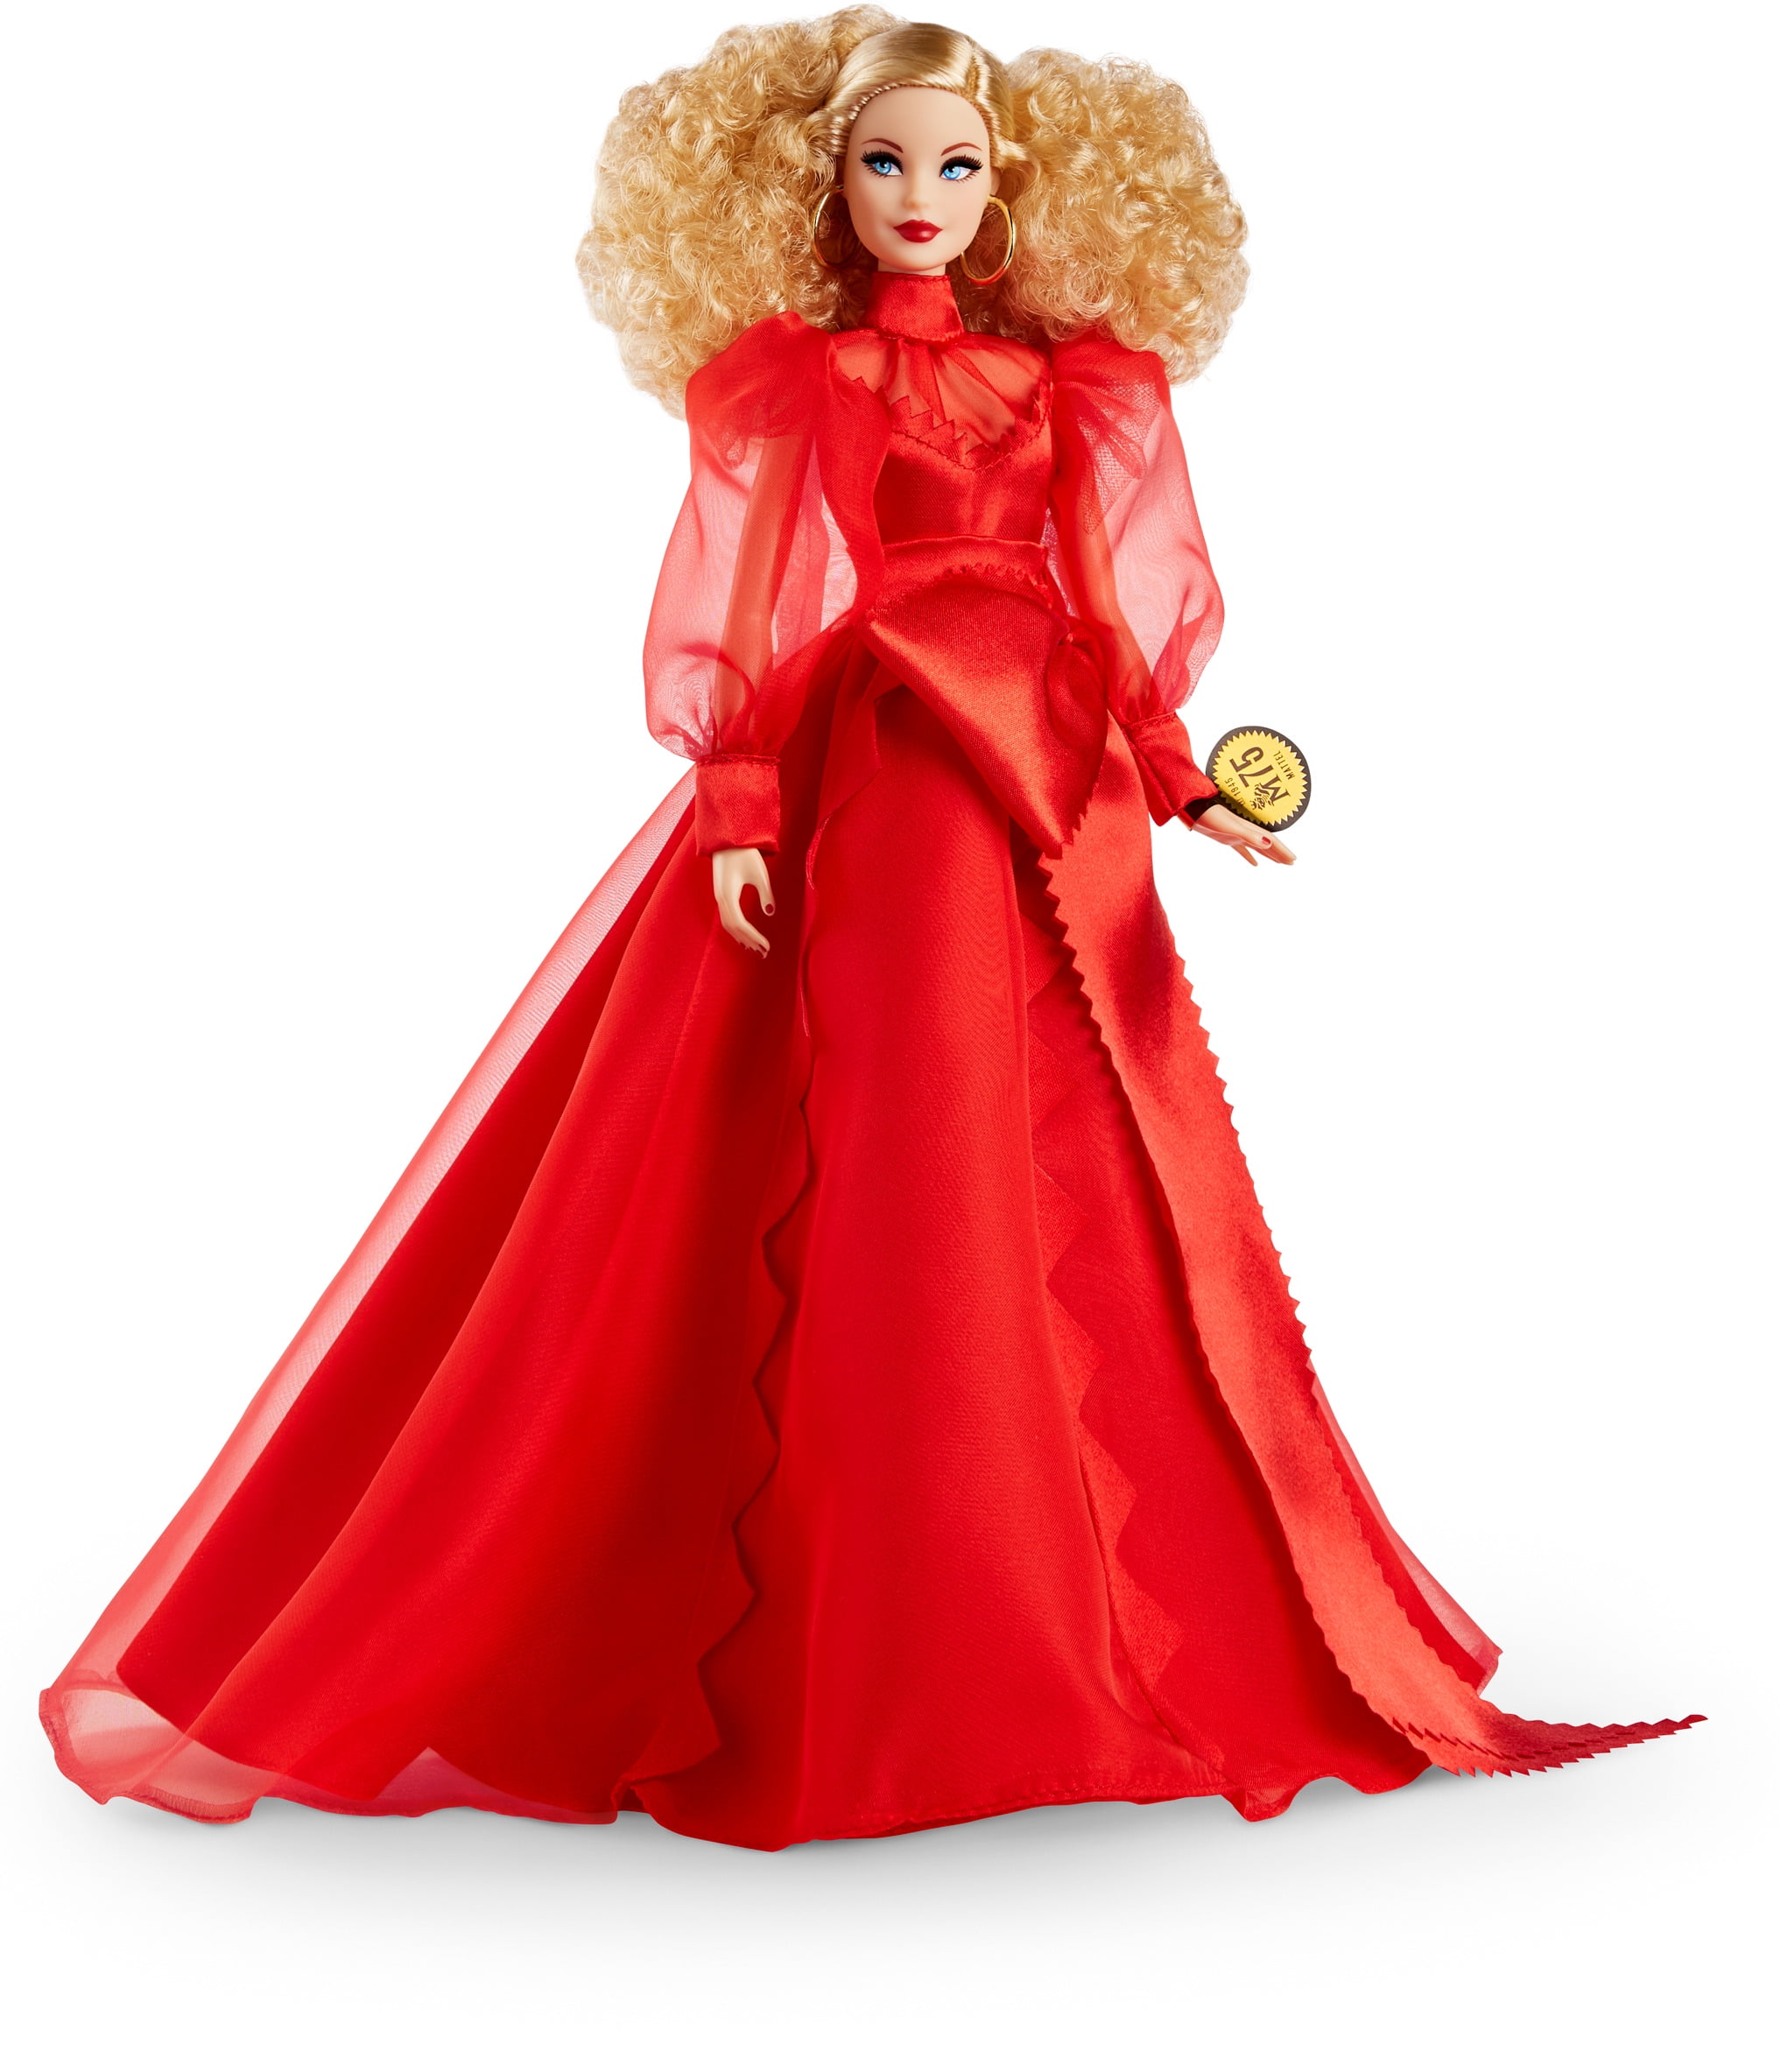 BARBIE METALLIC RED HOT GOWN FASHION MODEL MUSE COLLECTOR HOLIDAY FASHIONISTA 